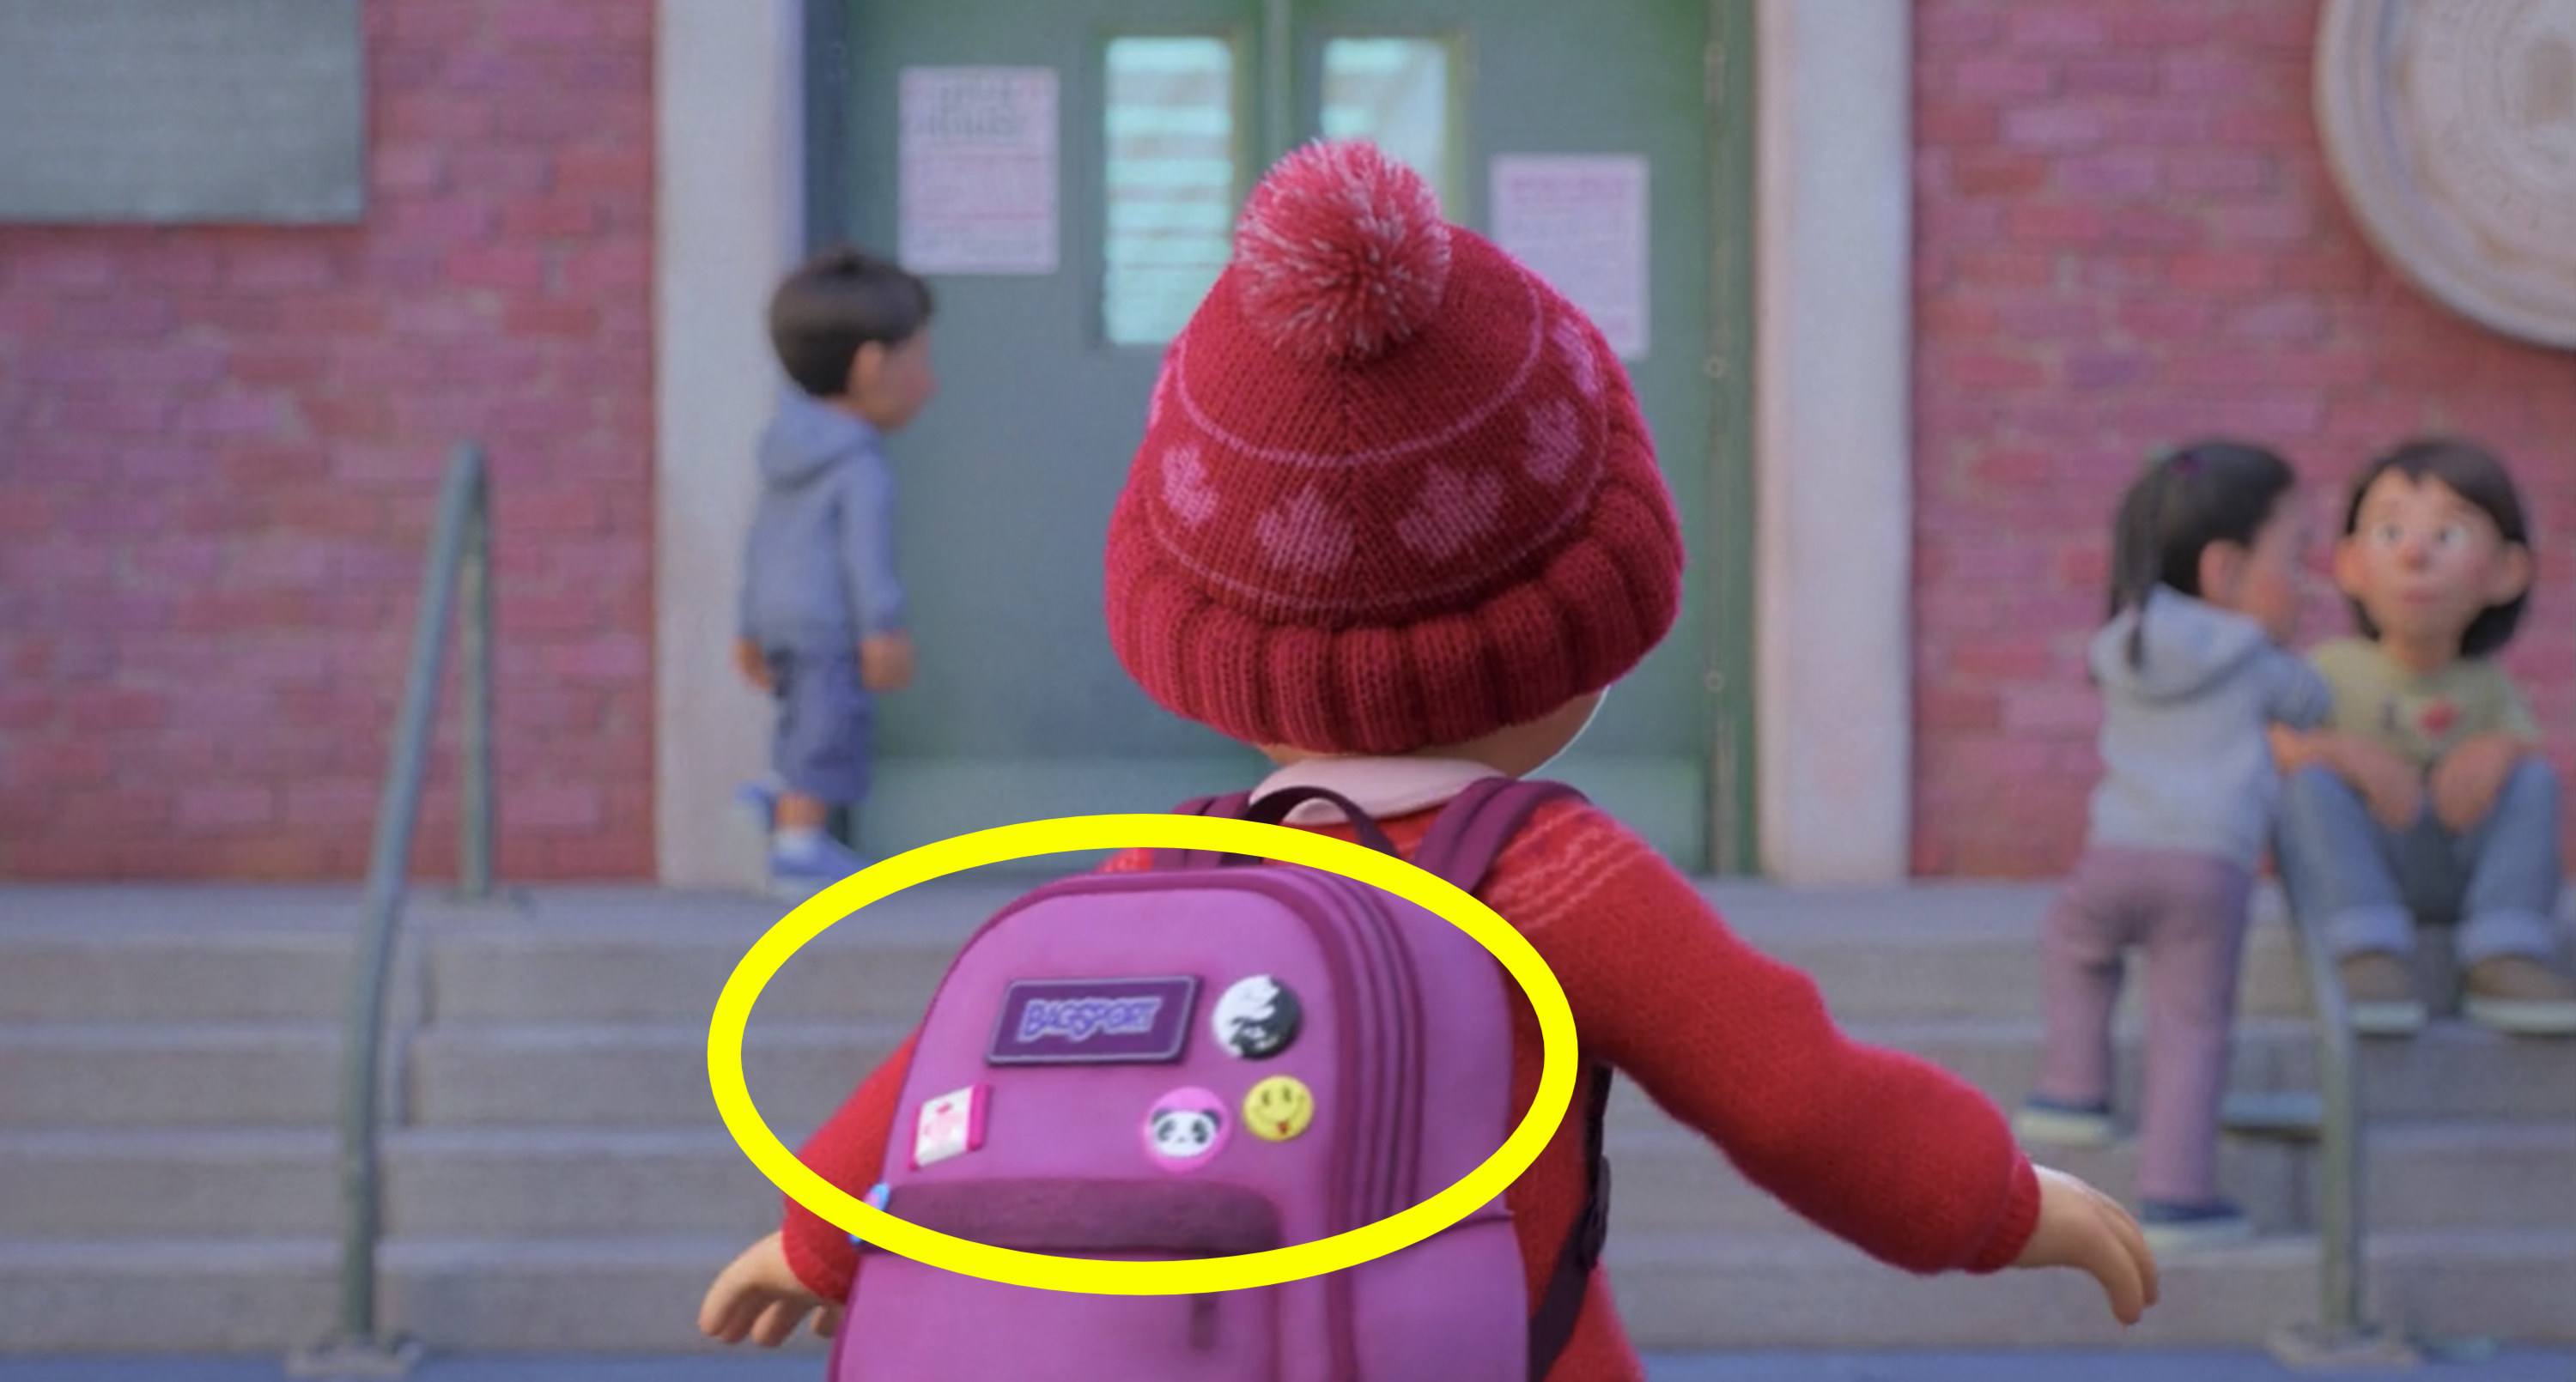 Mei walking into school with the logo &quot;BagSport&quot; circled on her bookbag